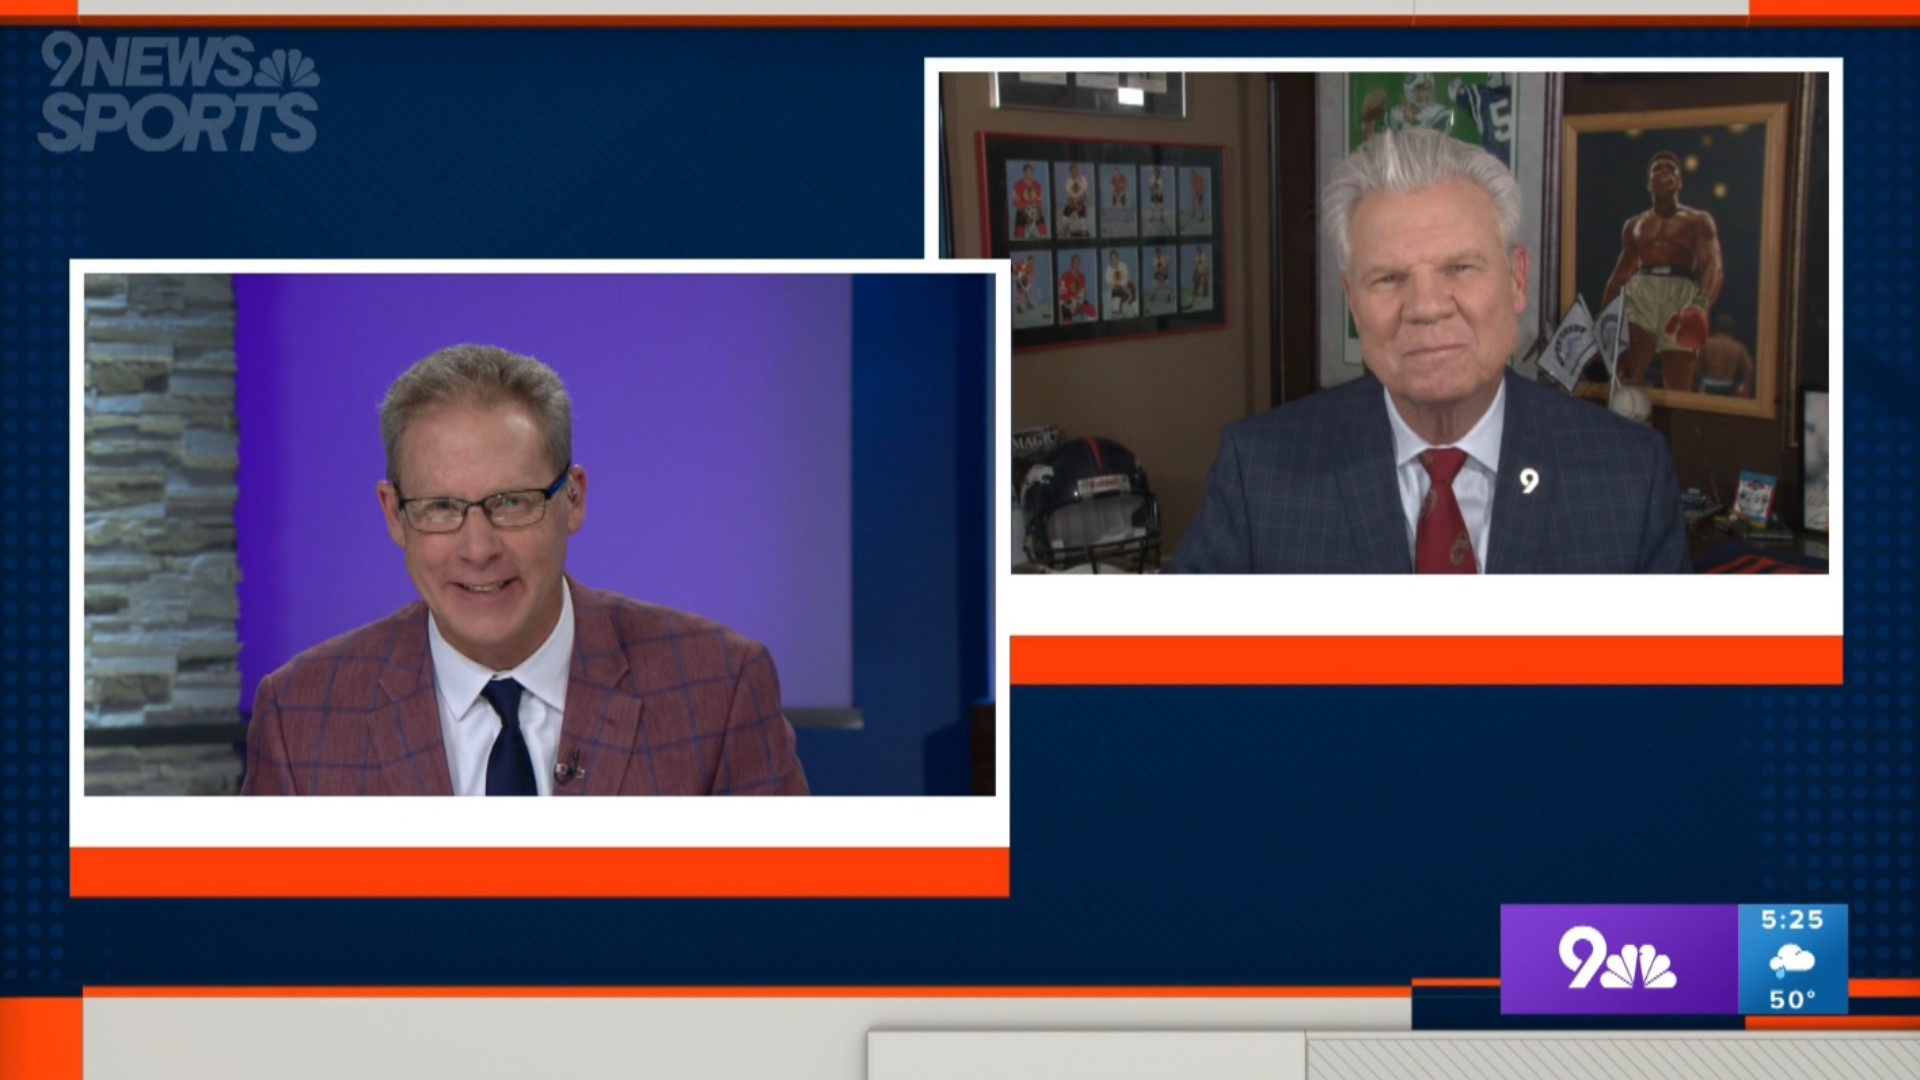 Mike Klis joined Rod Mackey live on 9NEWS to discuss the Denver Broncos 2023 NFL schedule release.